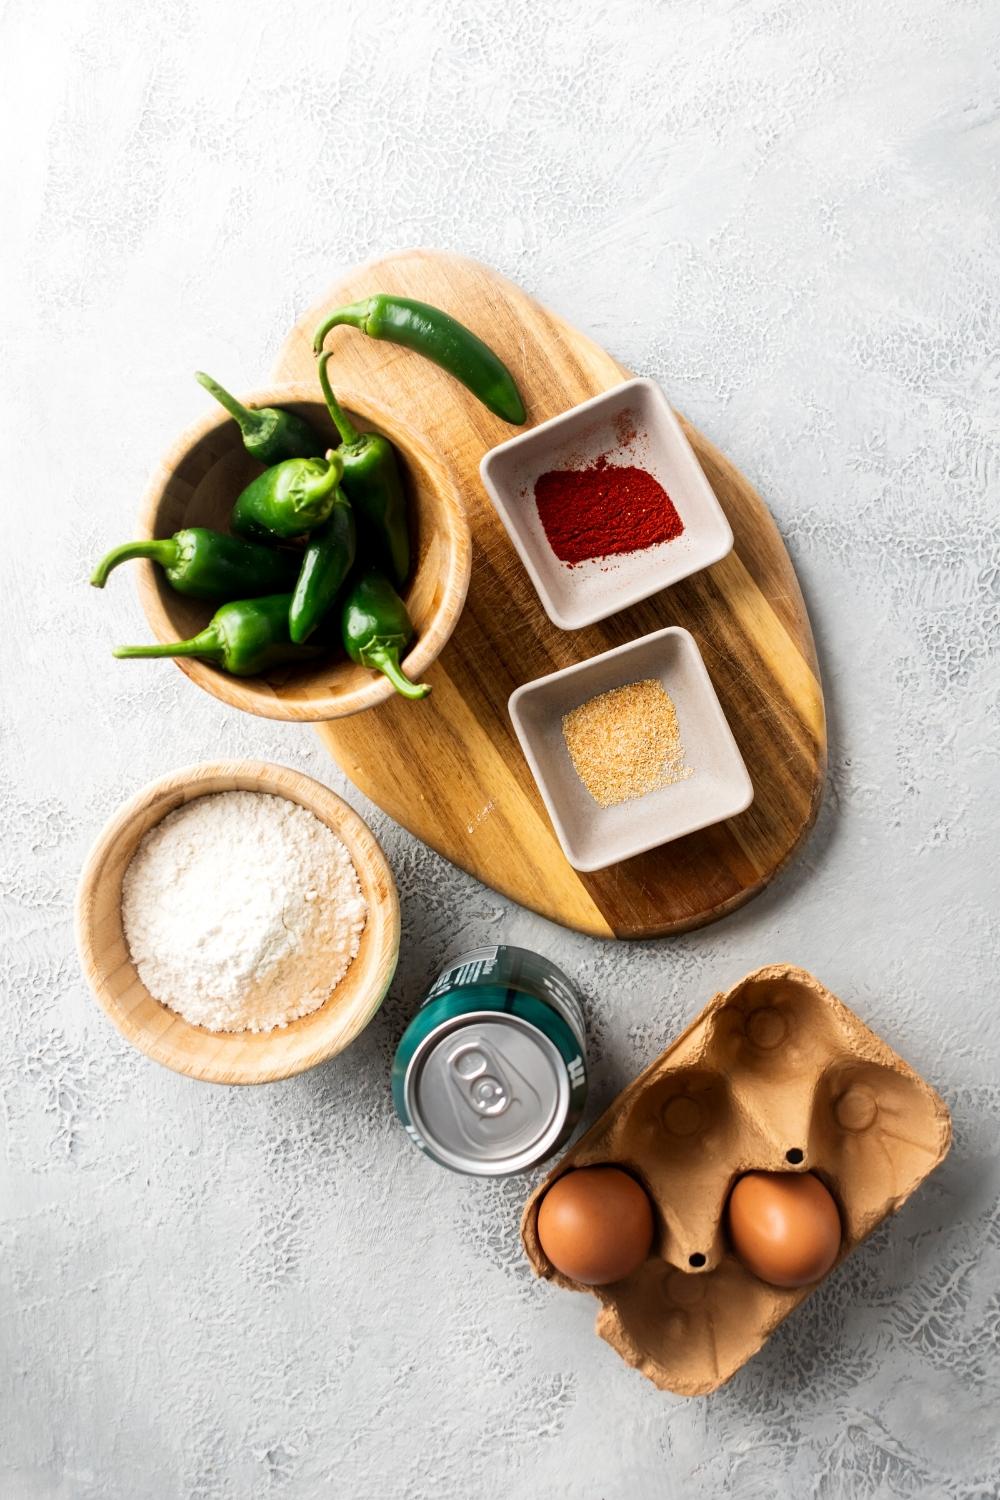 Jalapeños in a wooden bowl, paprika in a white square bowl, garlic powder and a white square bowl, flour in a wooden bowl, a can of beer, and two eggs all on a white counter.